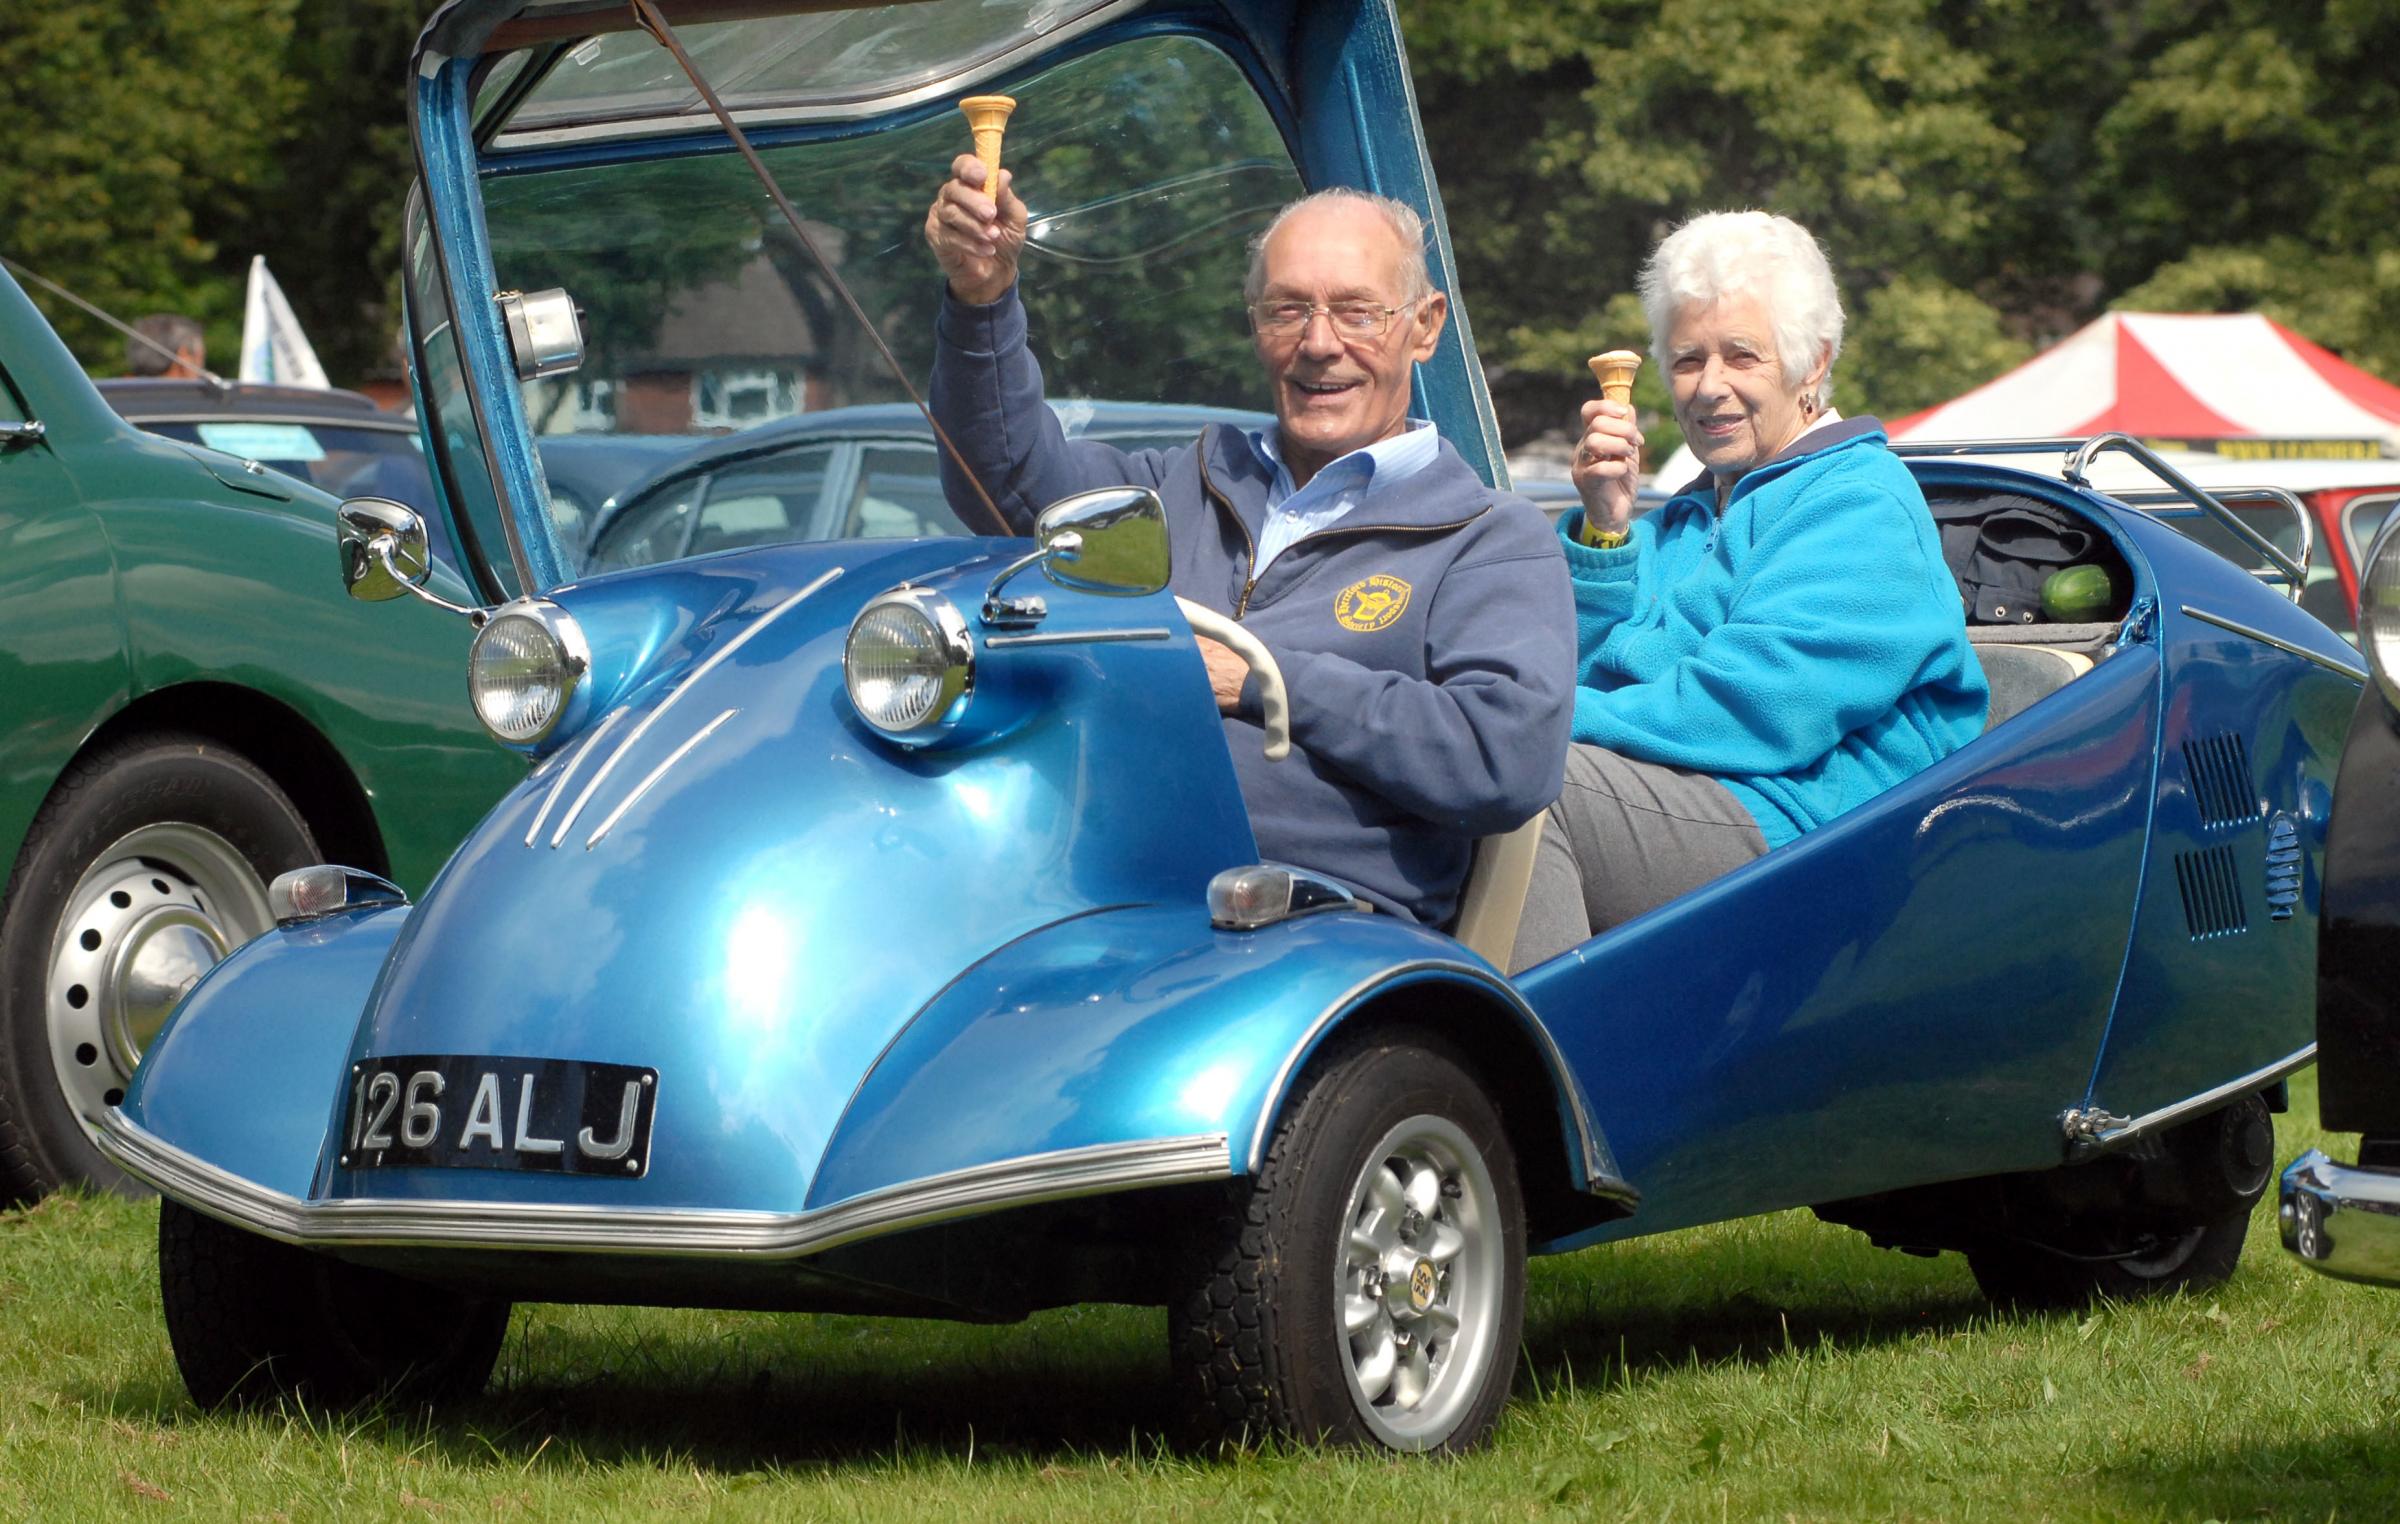 The Kington Vintage Rally returns to the town this weekend